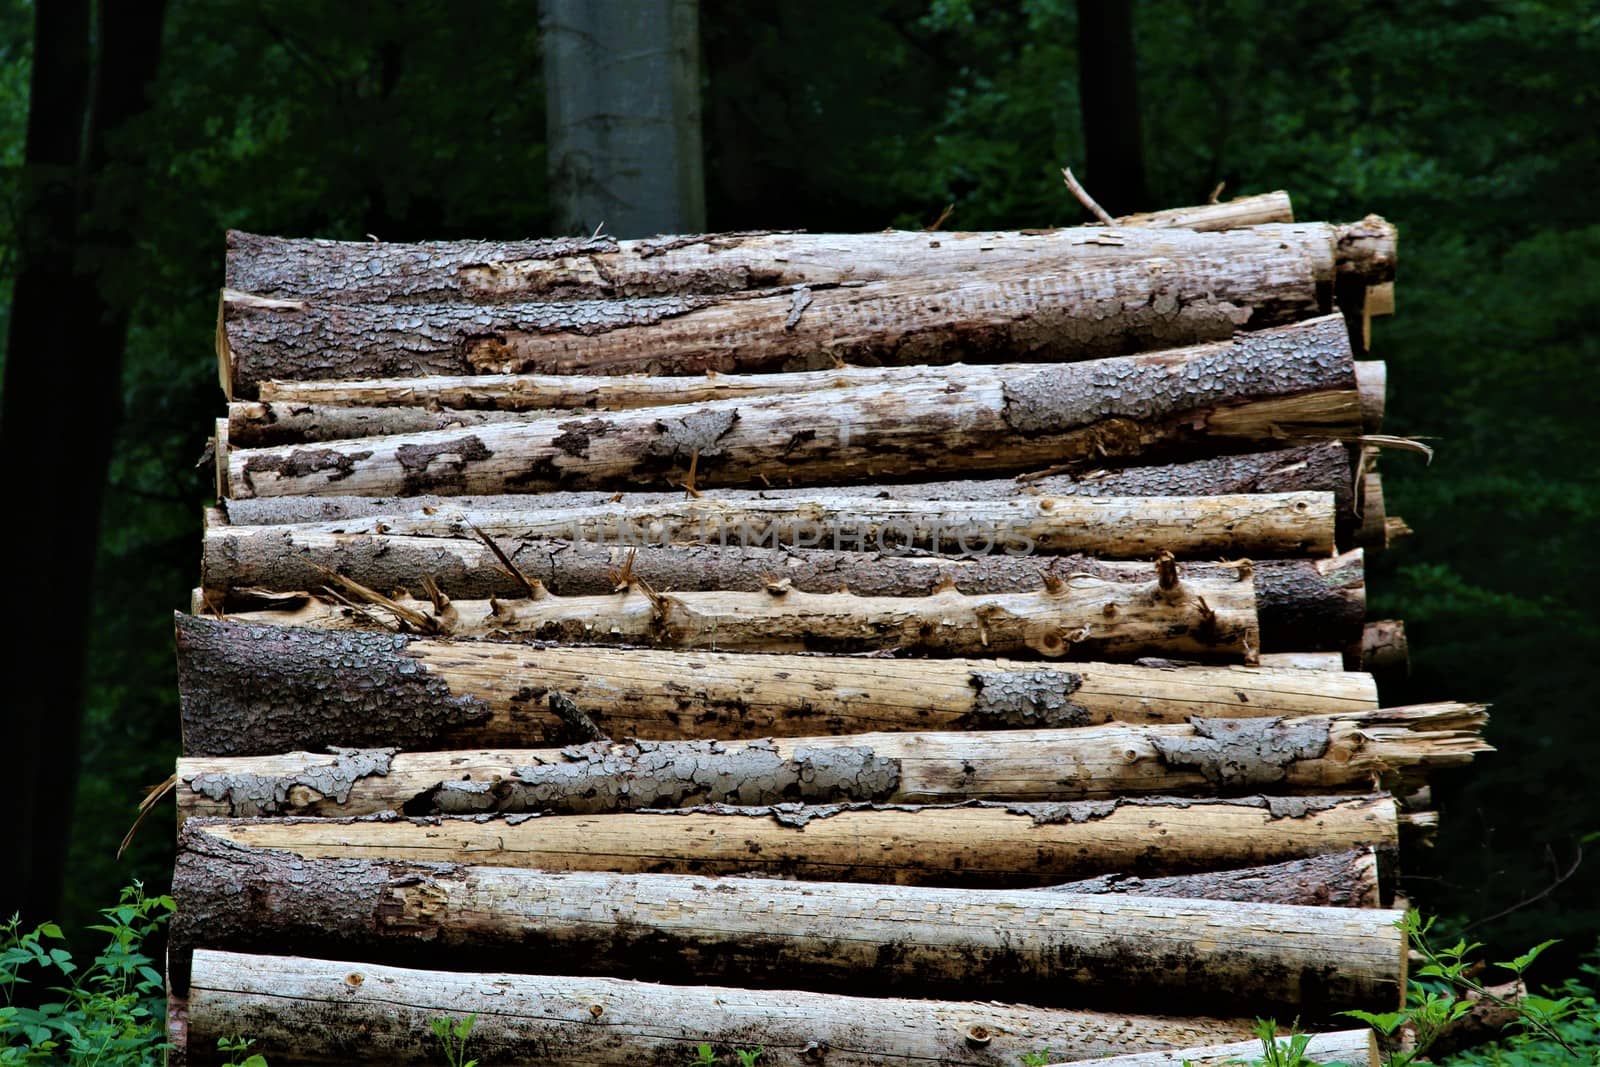 A stack of wood in the forest by Luise123